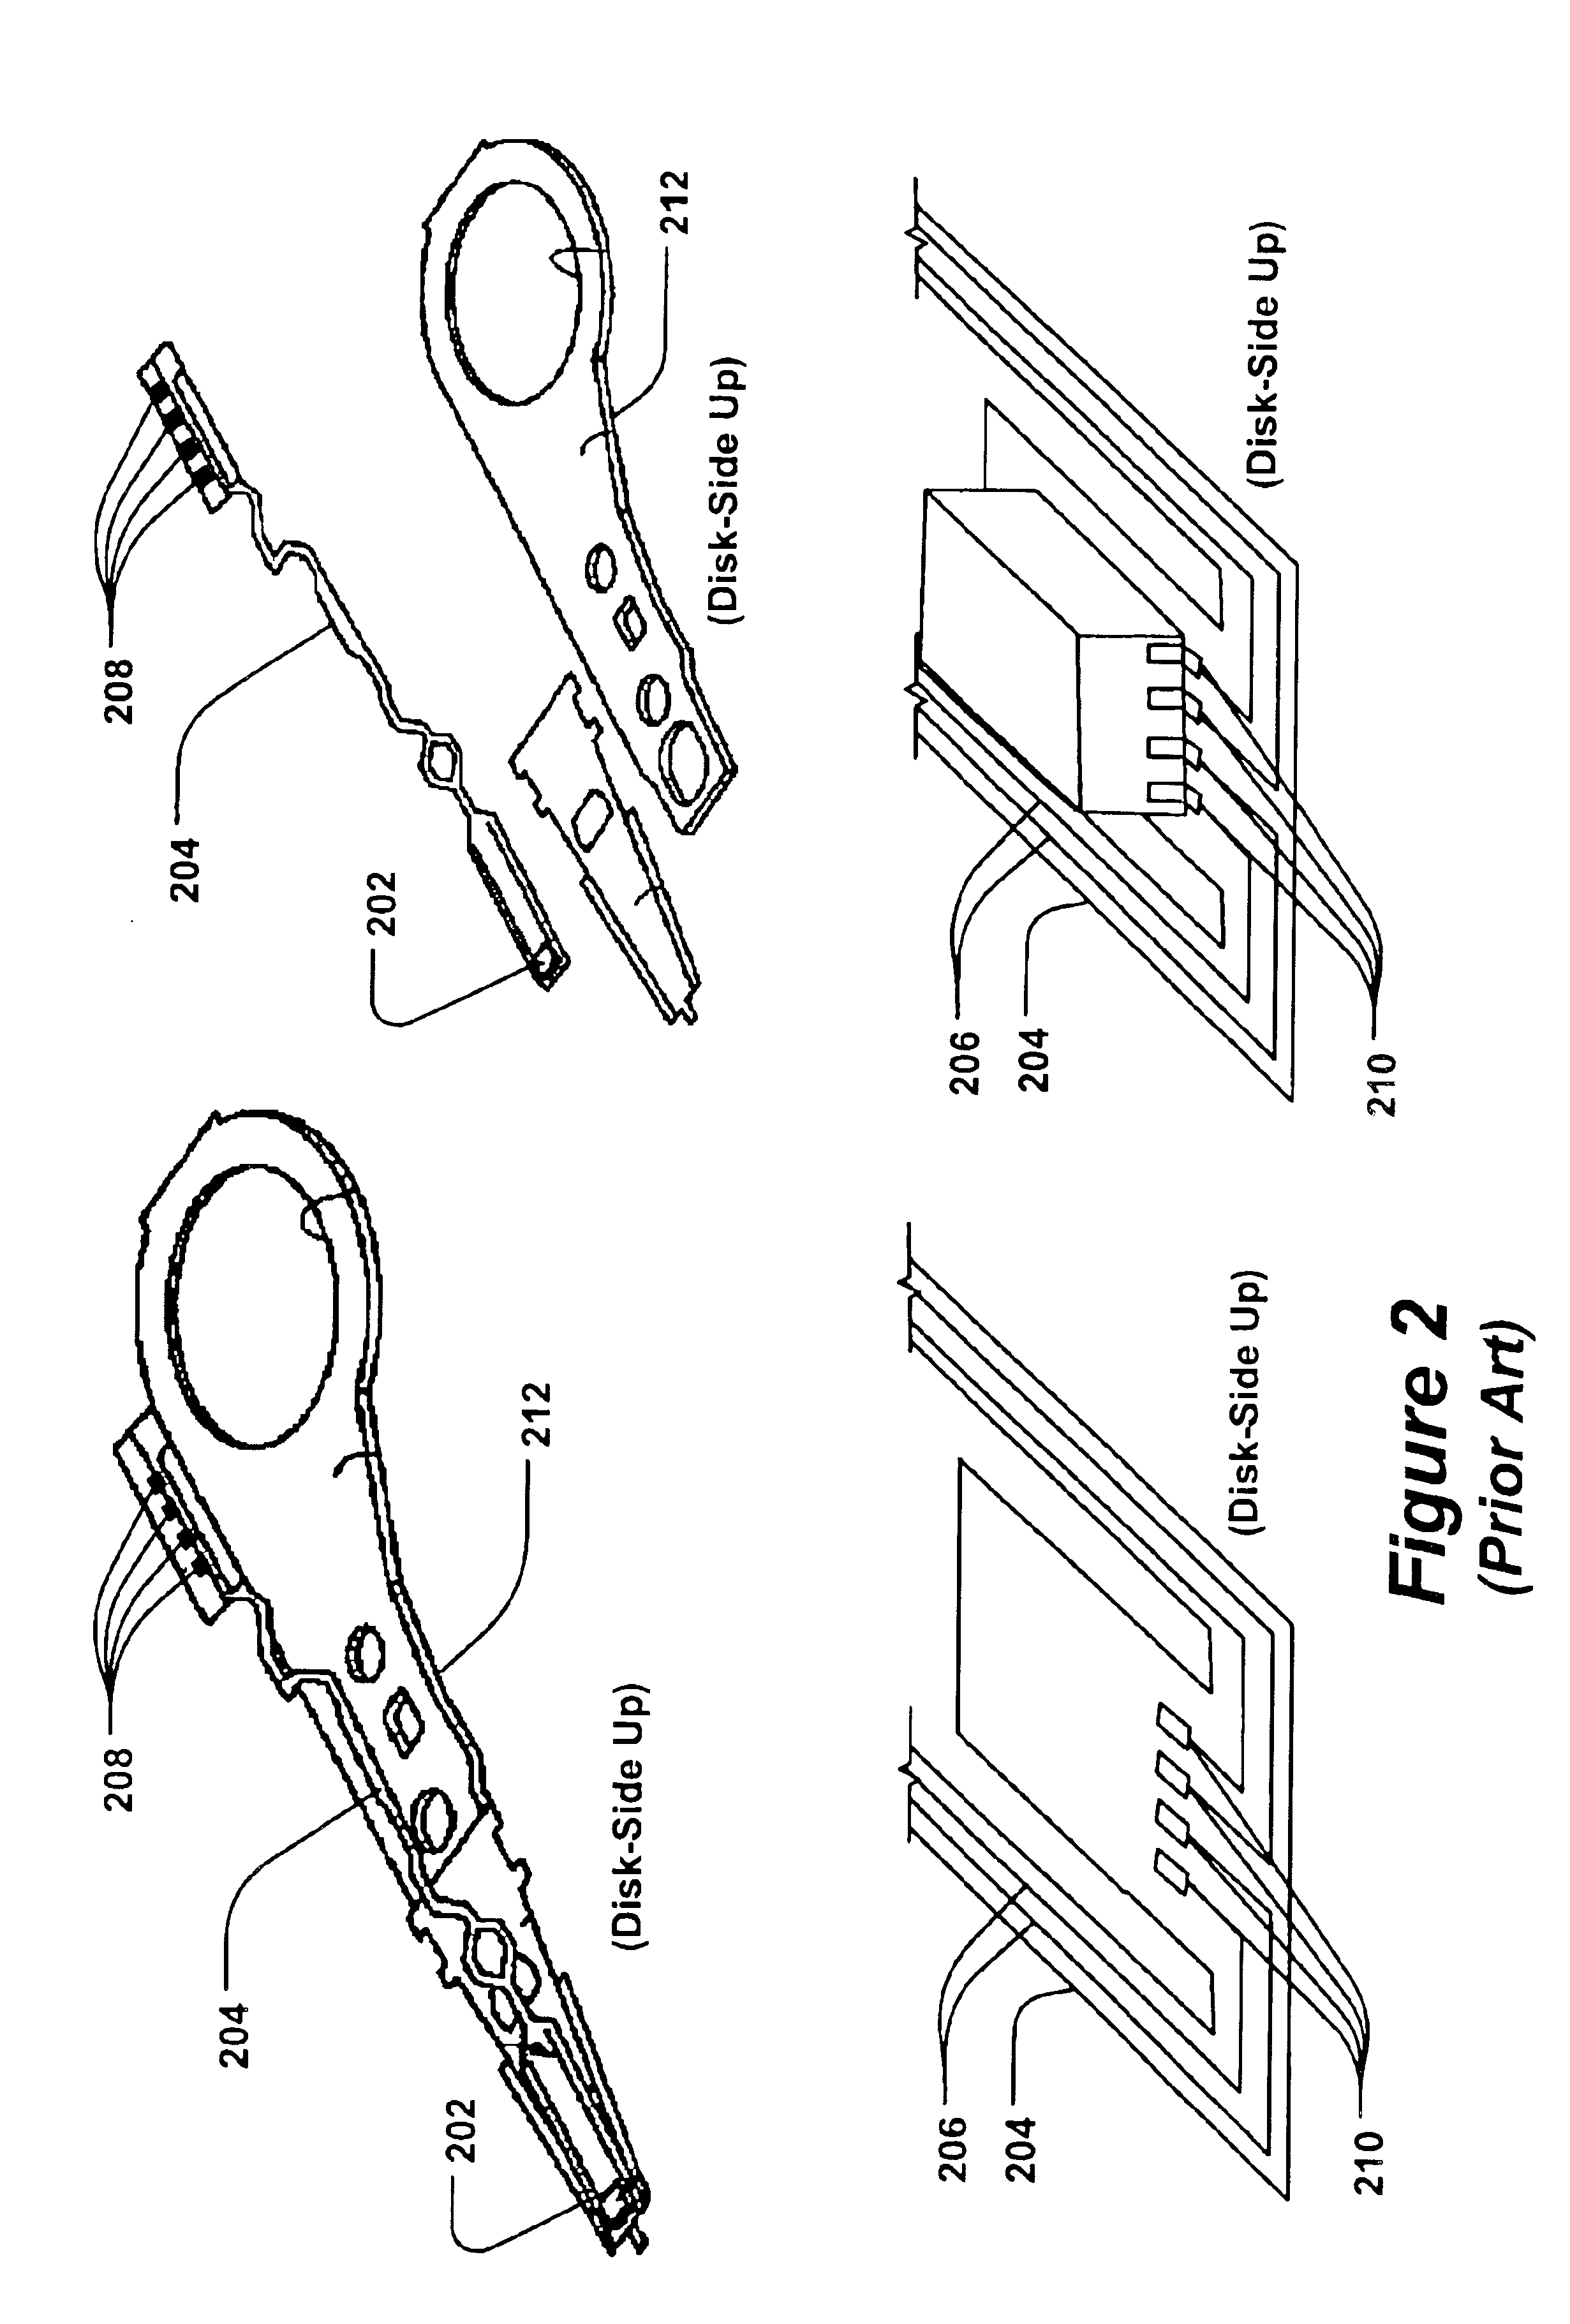 System and method for improving piezoelectric micro-actuator operation by preventing undesired micro-actuator motion hindrance and by preventing micro-actuator misalignment and damage during manufacture